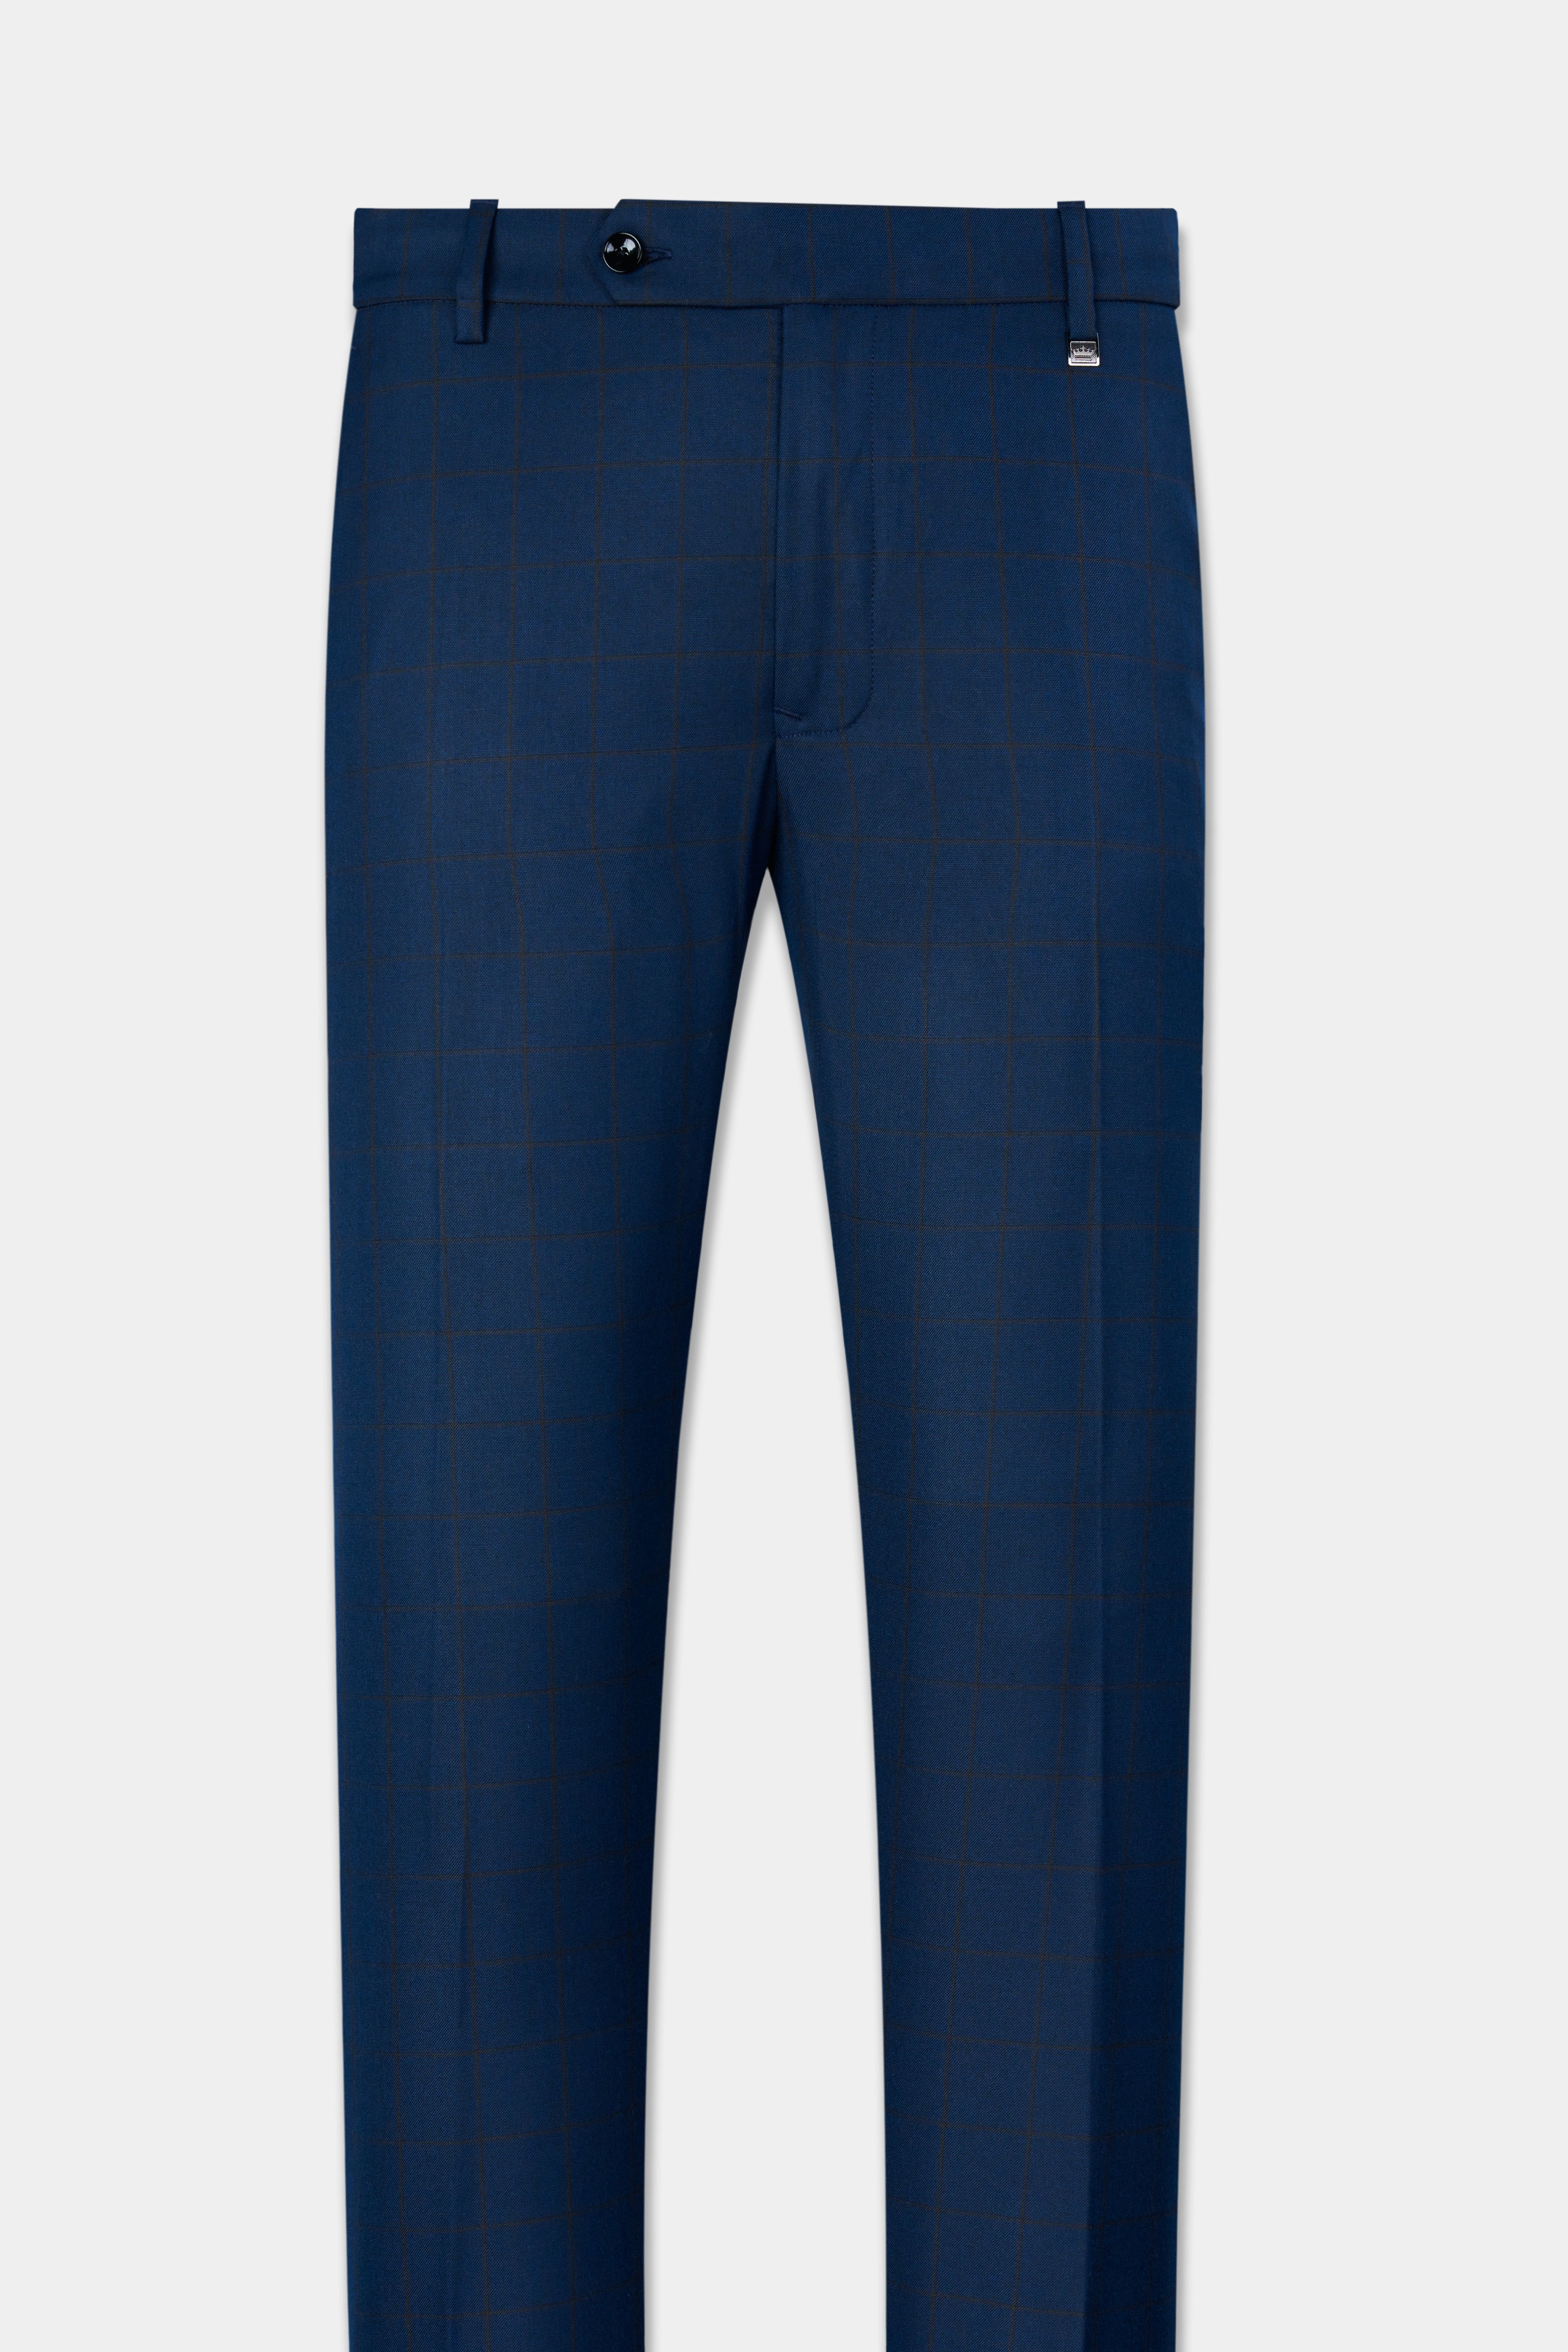 Tangaroa Blue and Subtle Black Checkered Wool Rich Pant T2871-28, T2871-30, T2871-32, T2871-34, T2871-36, T2871-38, T2871-40, T2871-42, T2871-44